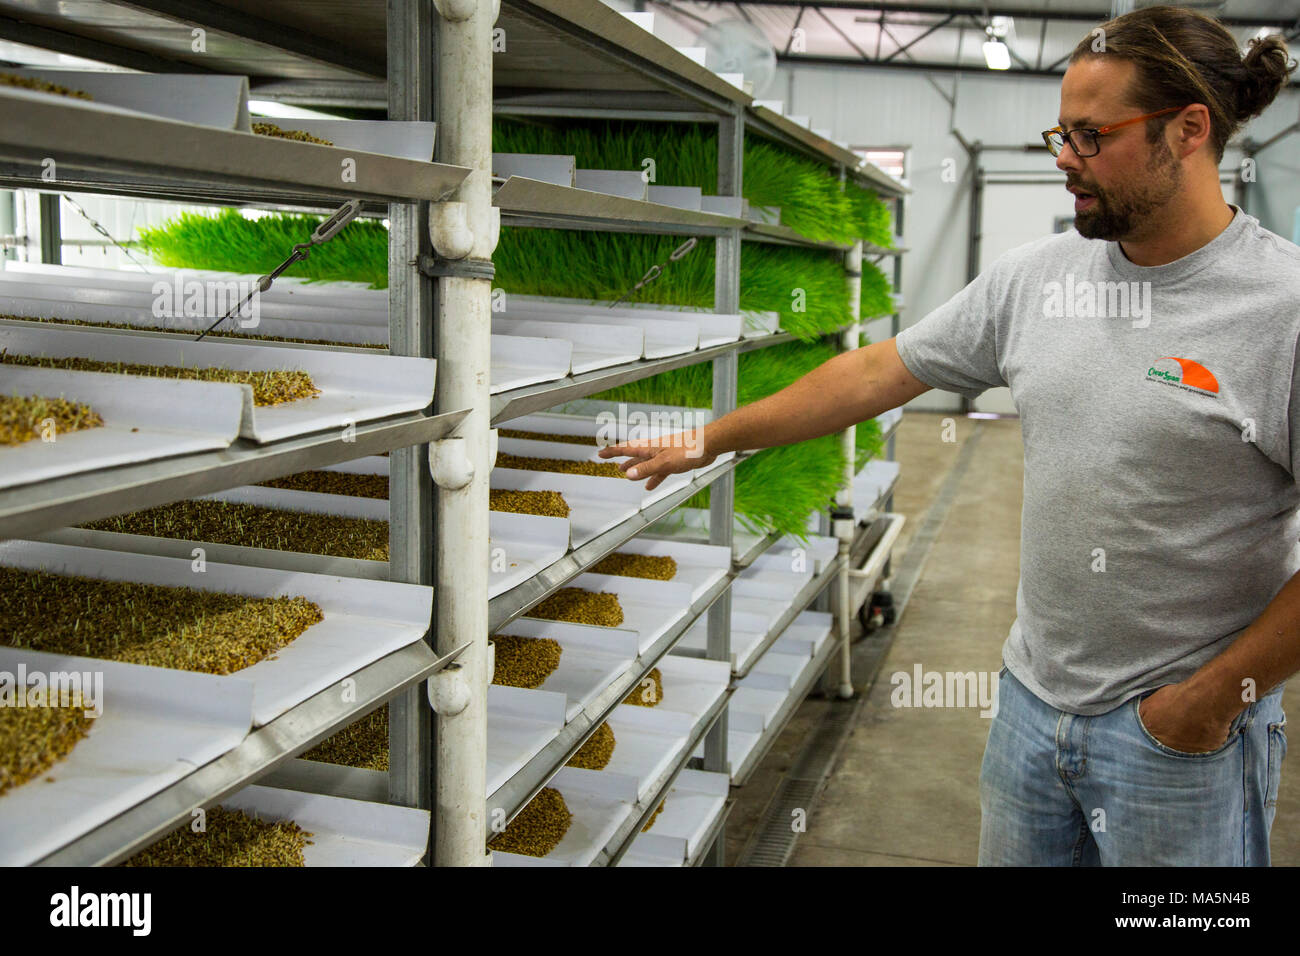 Hydroponic Agriculture, Cultivation of Barley Fodder.  1 tray will produce enough feed for 1 cow or 1 horse for 14 cents a day.  Dyersville, Iowa, USA Stock Photo